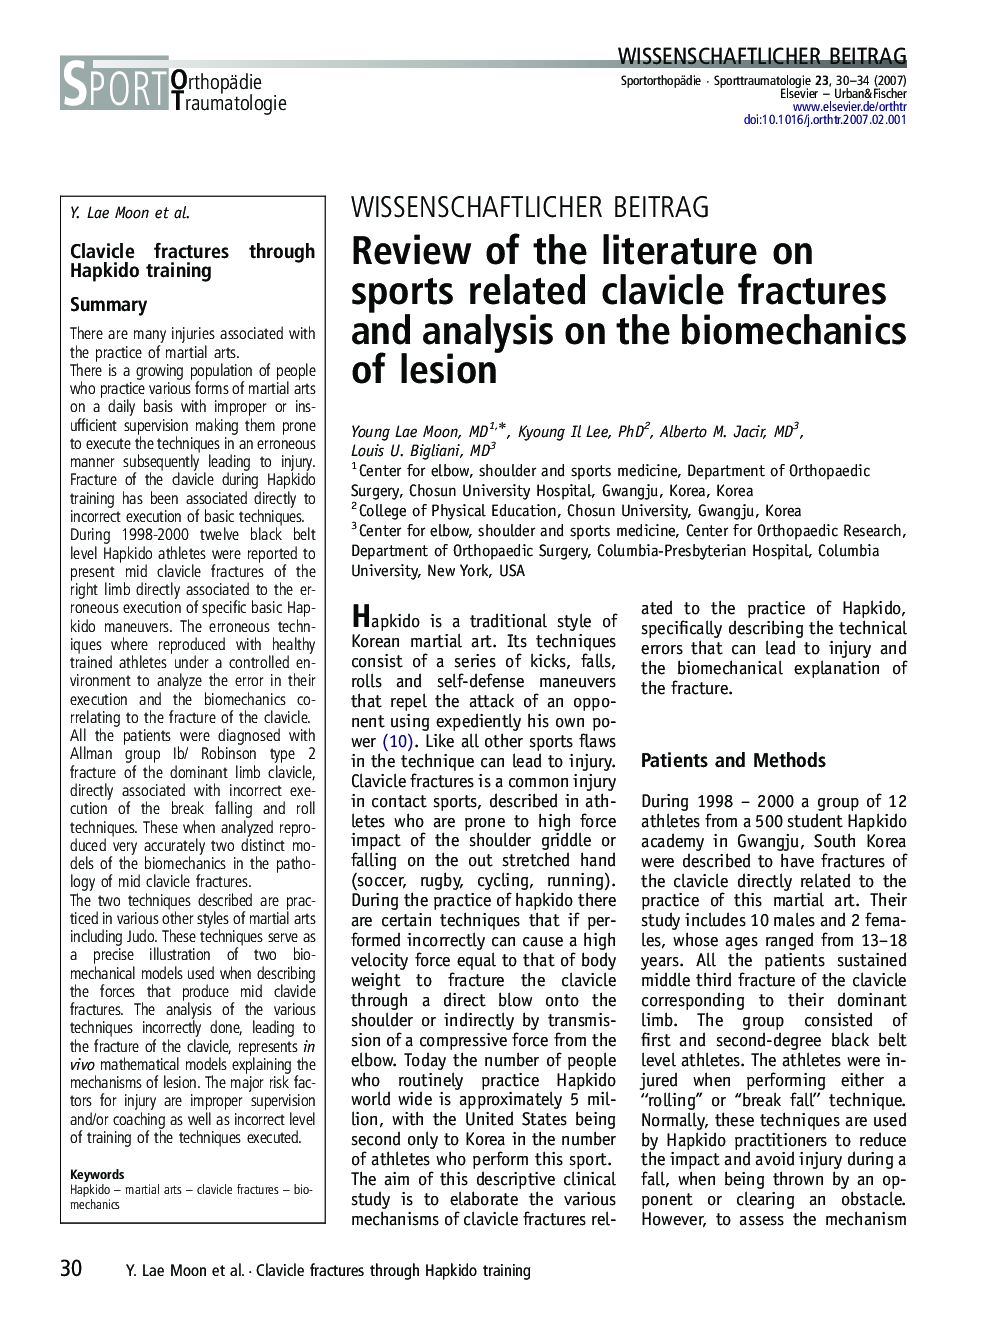 Review of the literature on sports related clavicle fractures and analysis on the biomechanics of lesion